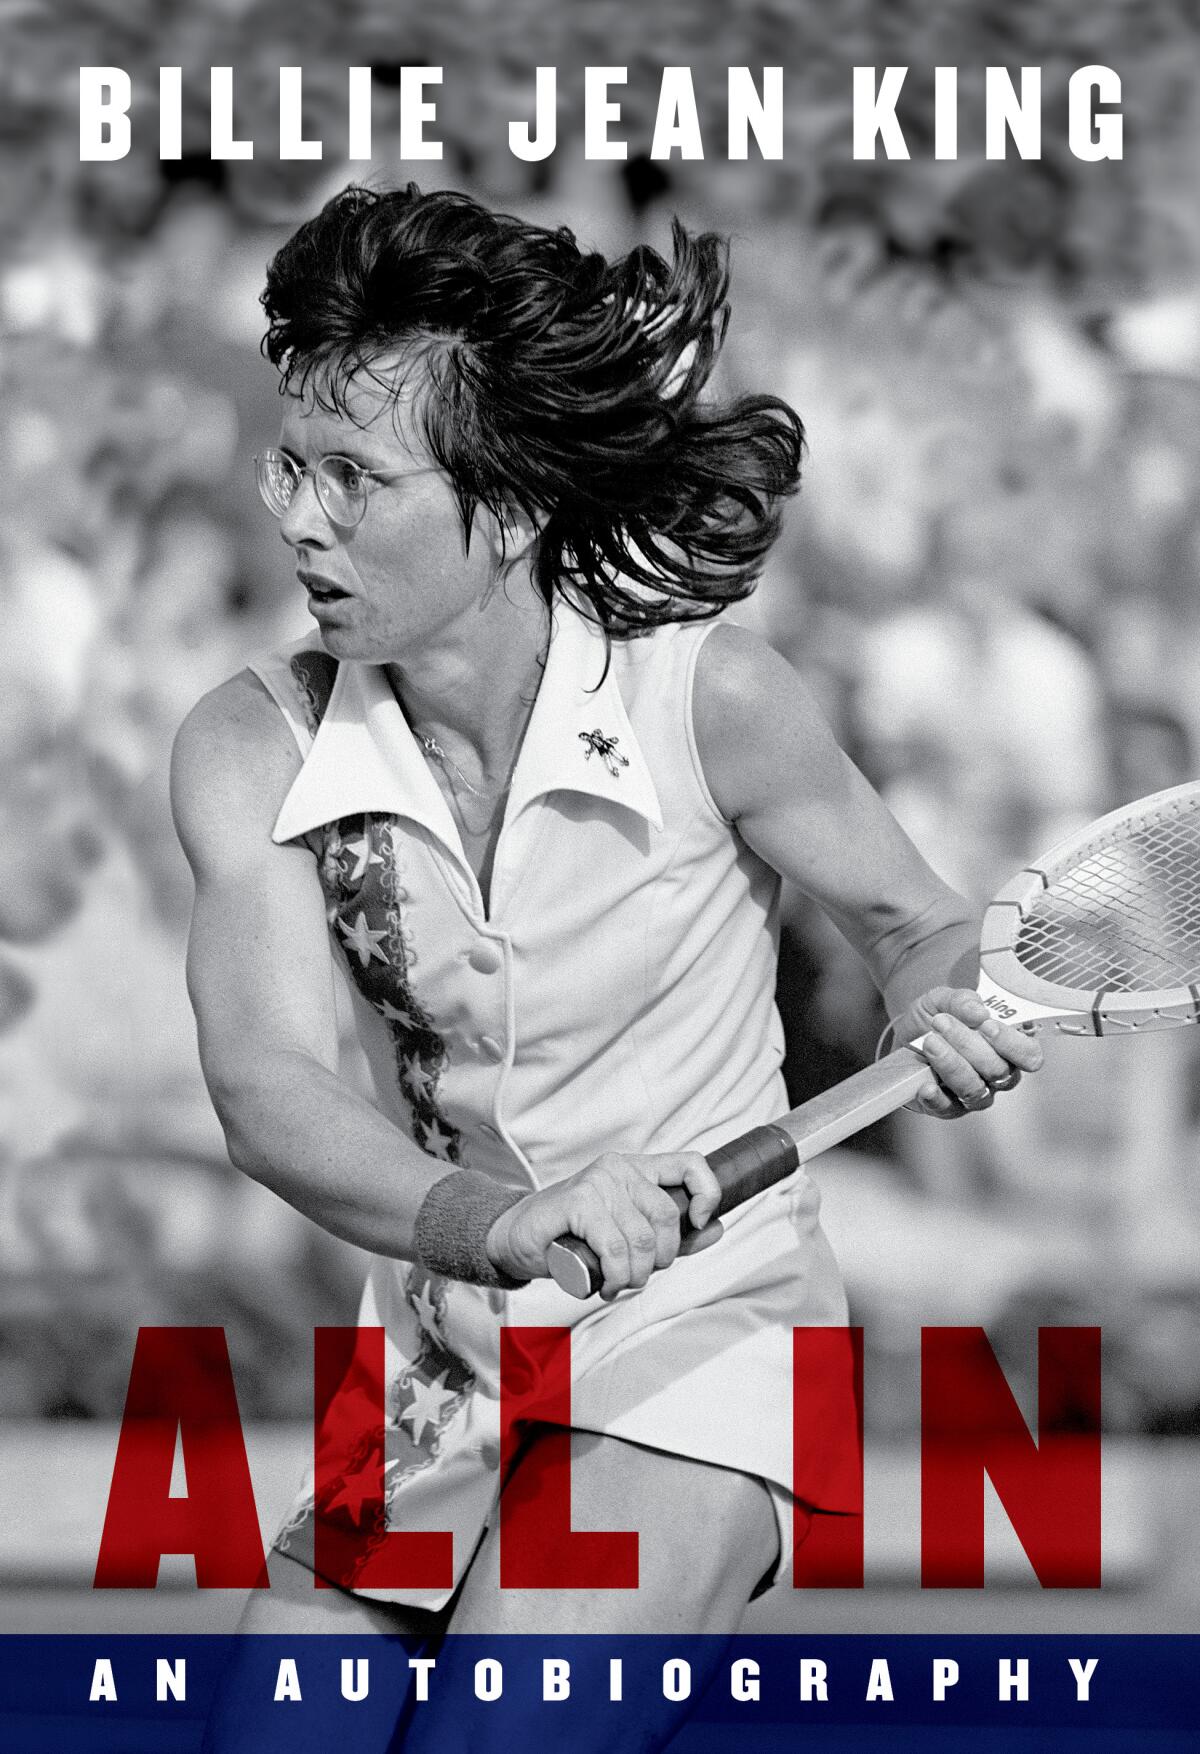 Book jacket for "All In" by Billie Jean King.